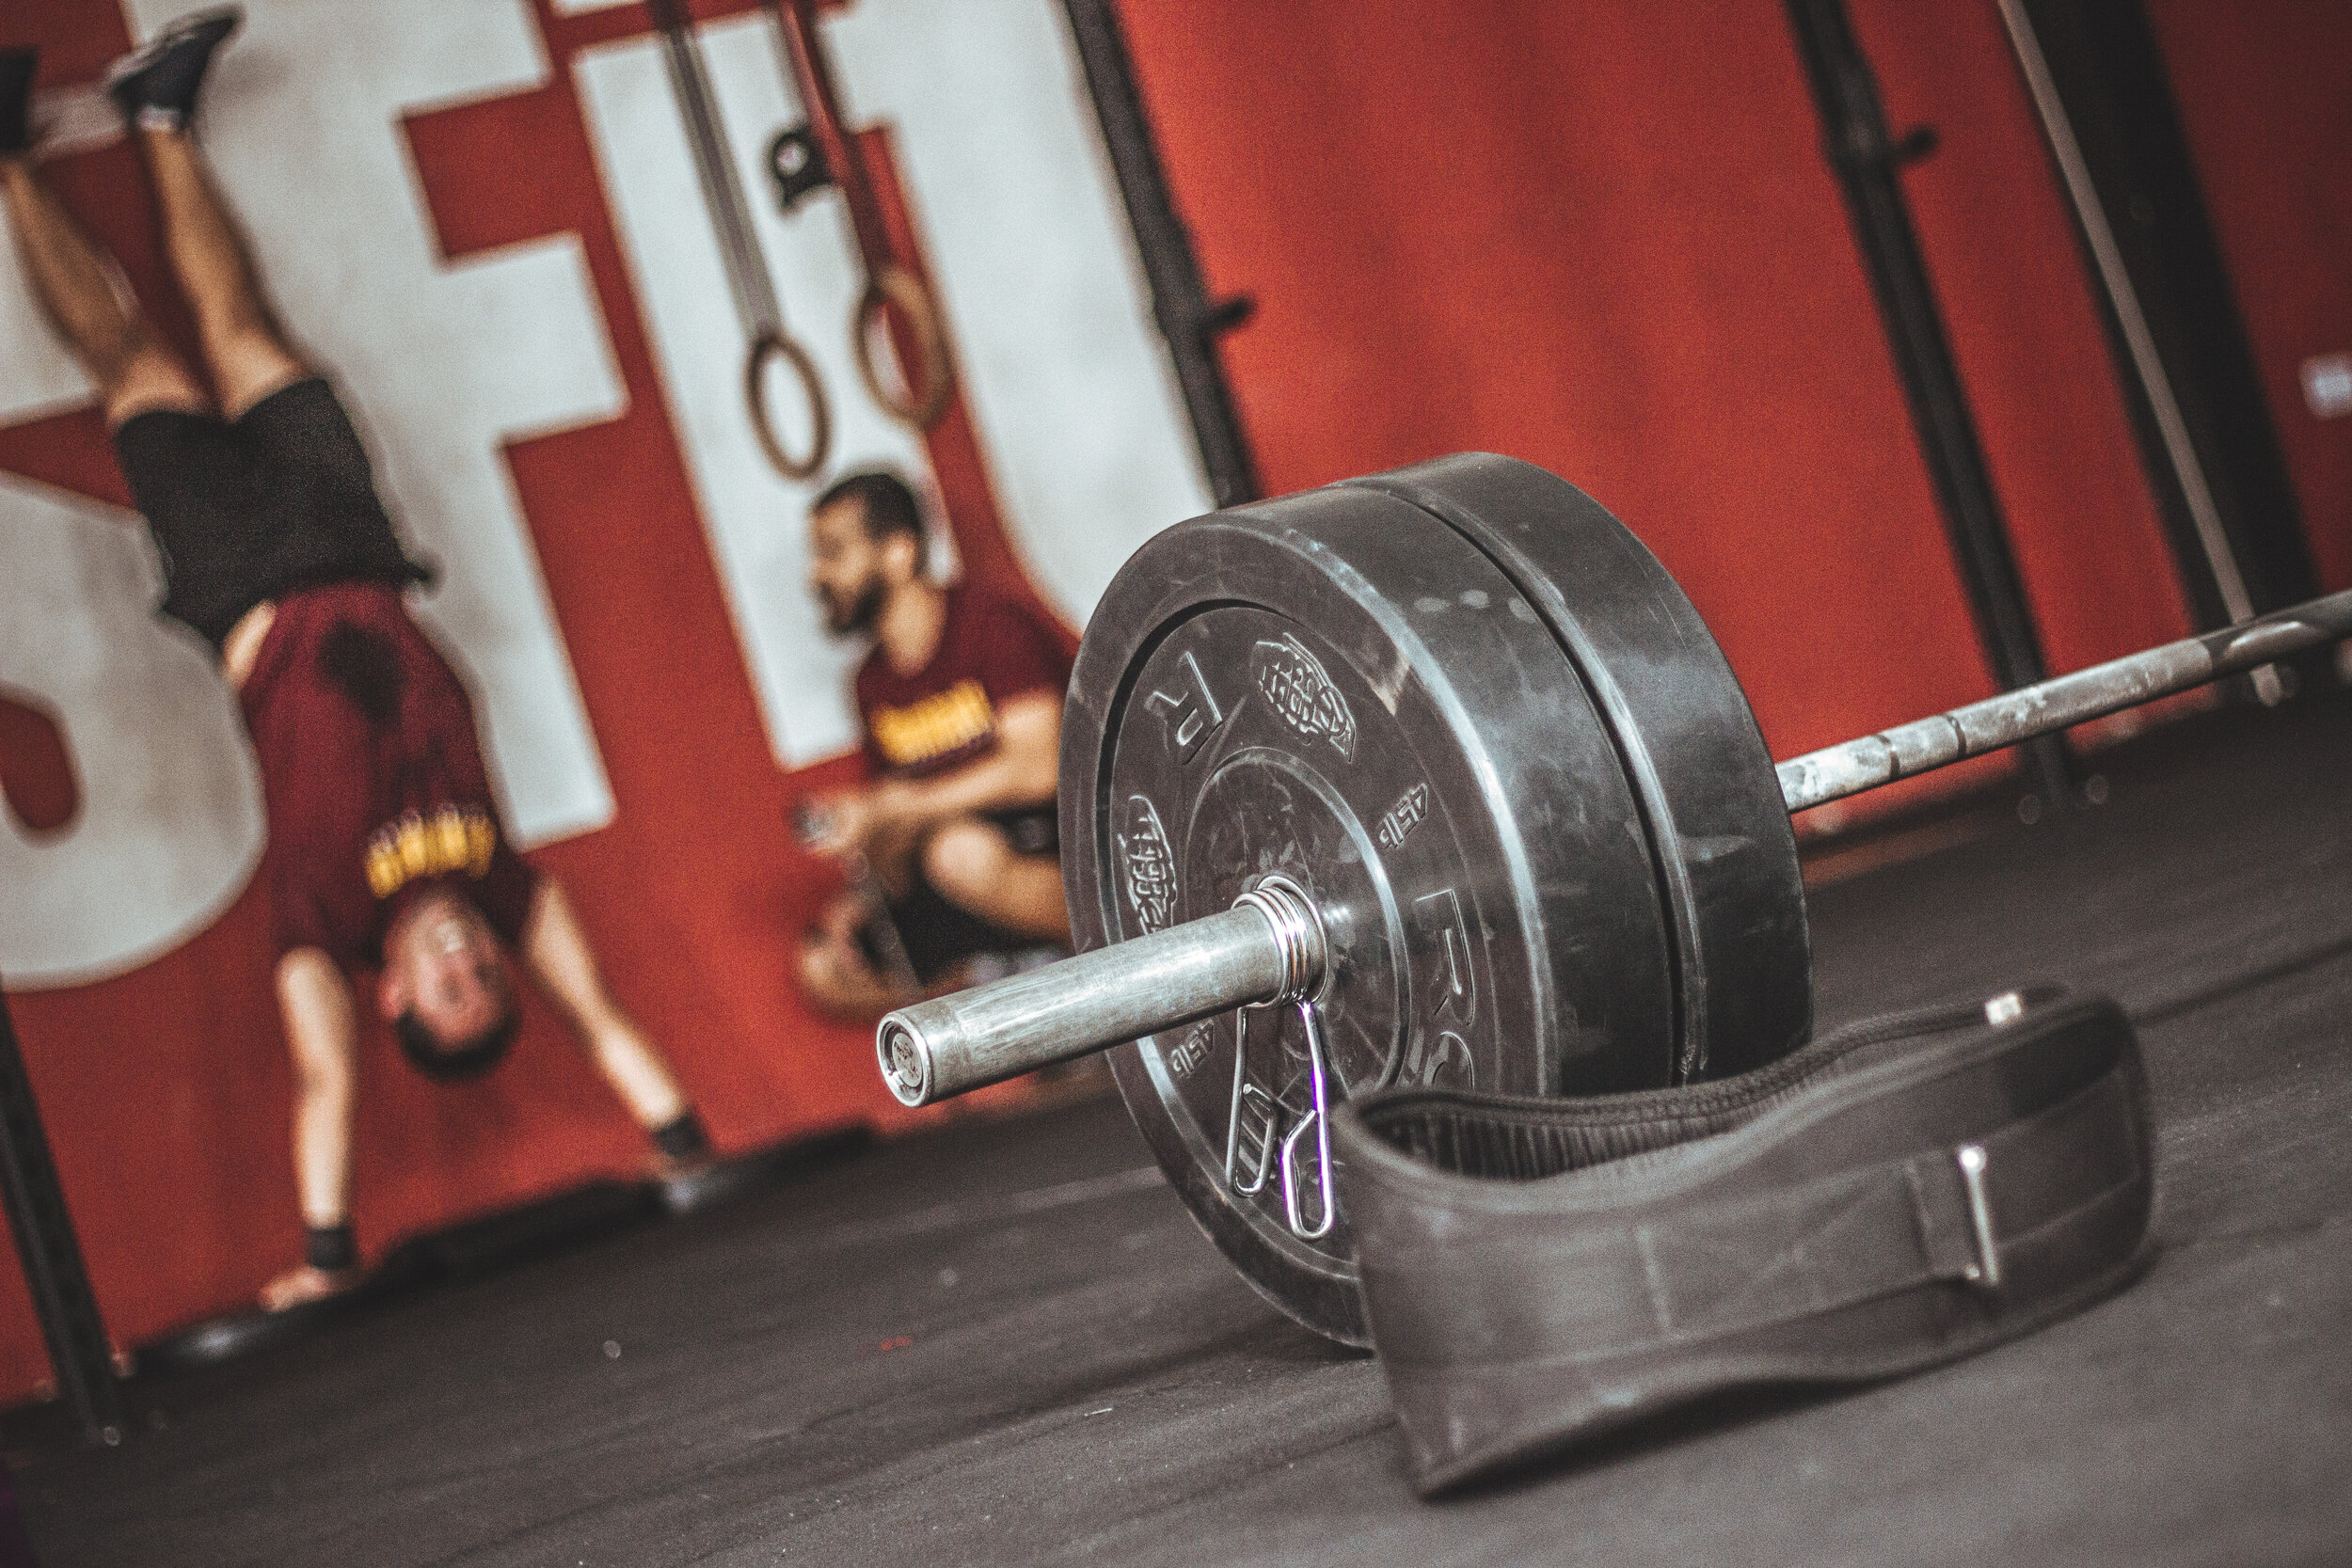 Canva - Focus Photography of Barbell.jpg